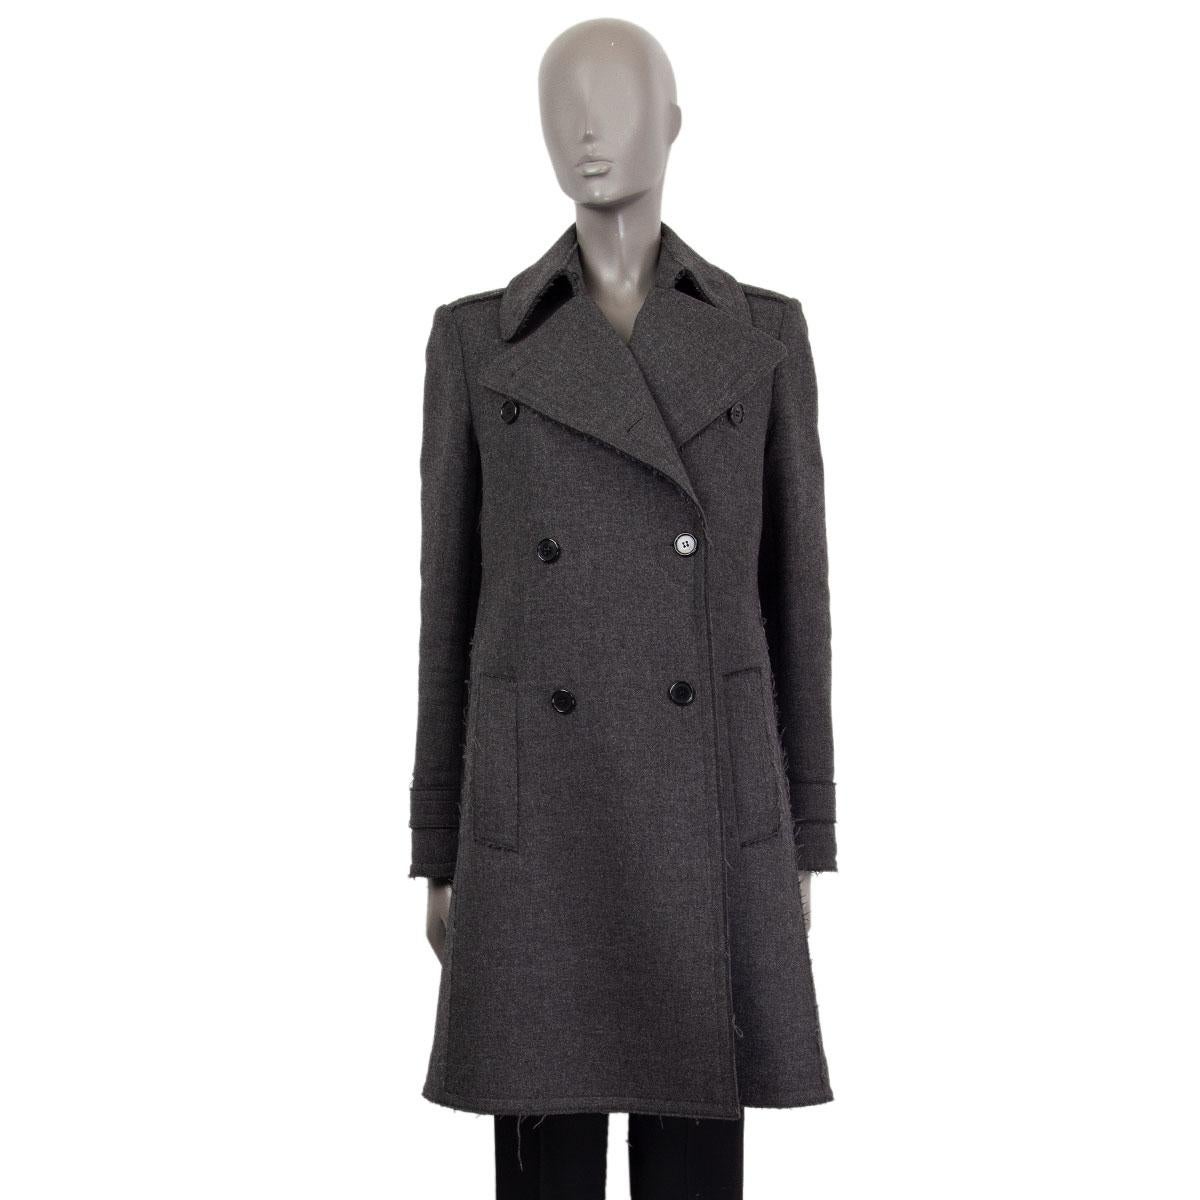 Céline double-breasted coat in dark gray wool (100%) with fringed hemlines, peak-collar, A-line, long sleeves and two slit-pockets in the front. Sleeves lined in off-white cupro. There has been some repair on the inner seam lining with some